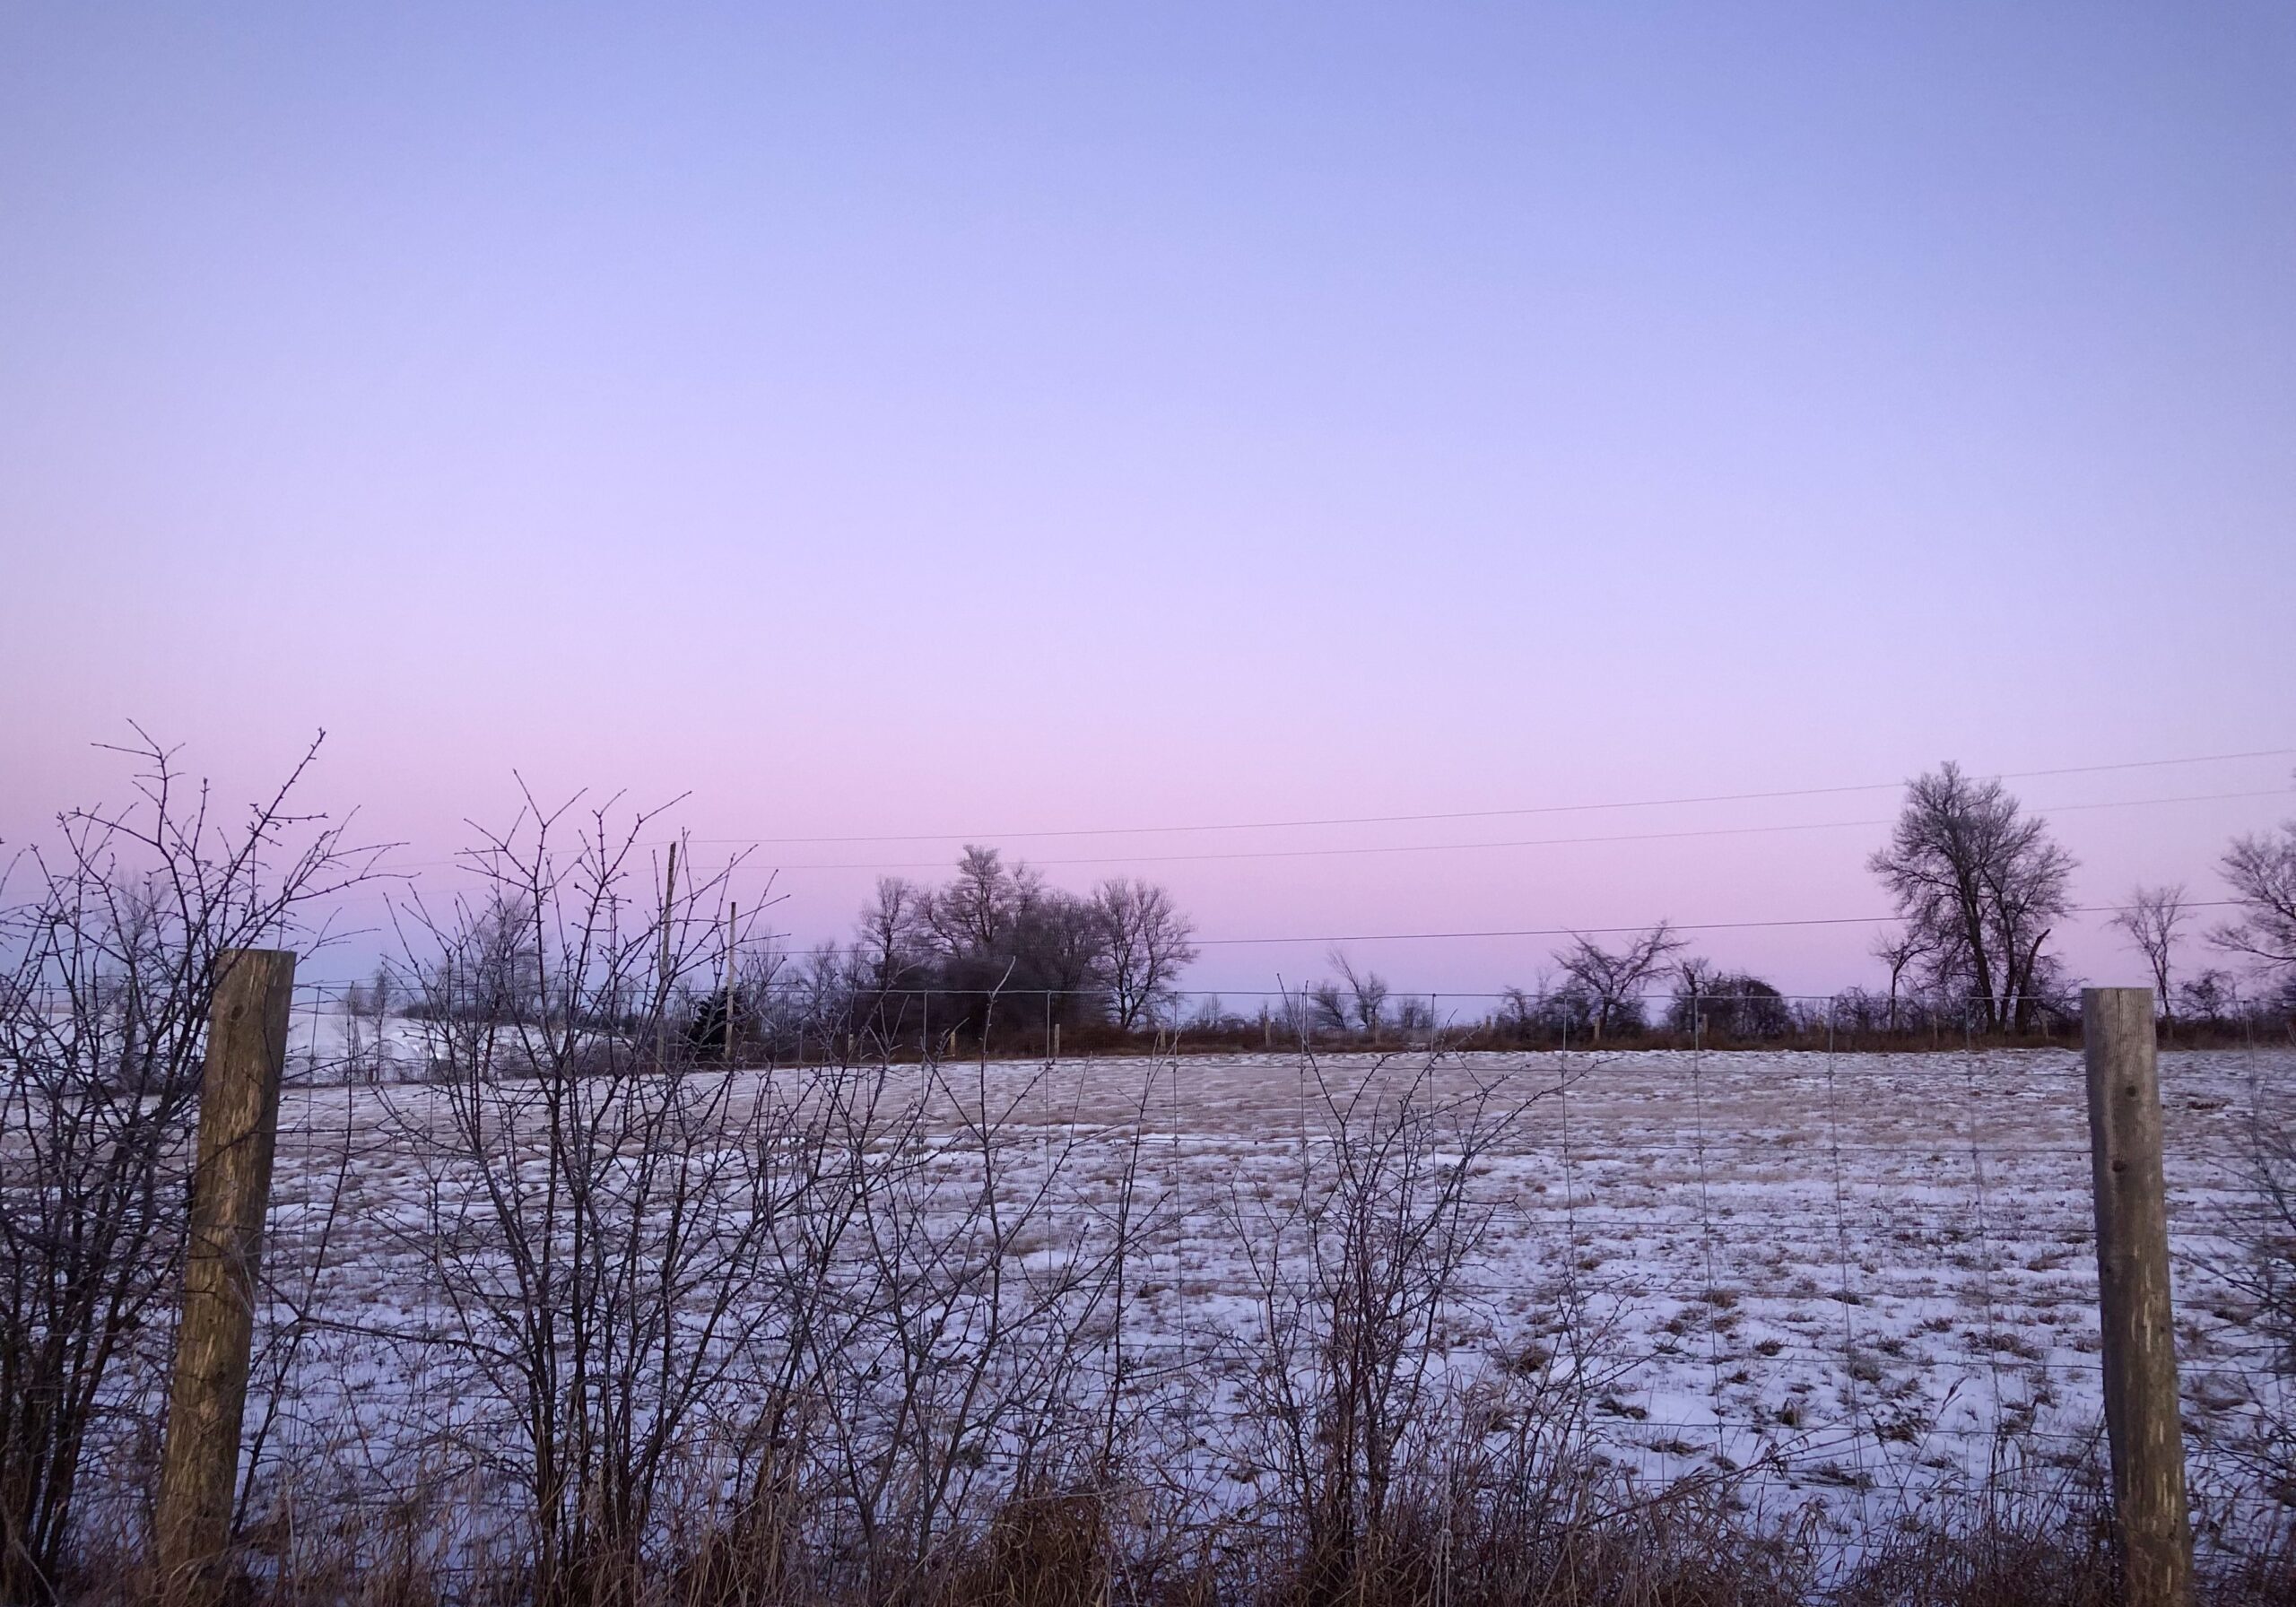 a snowy field at sunrise. in the forground, there is long grass, in the background, trees. the sky is light pink that fades into blue.